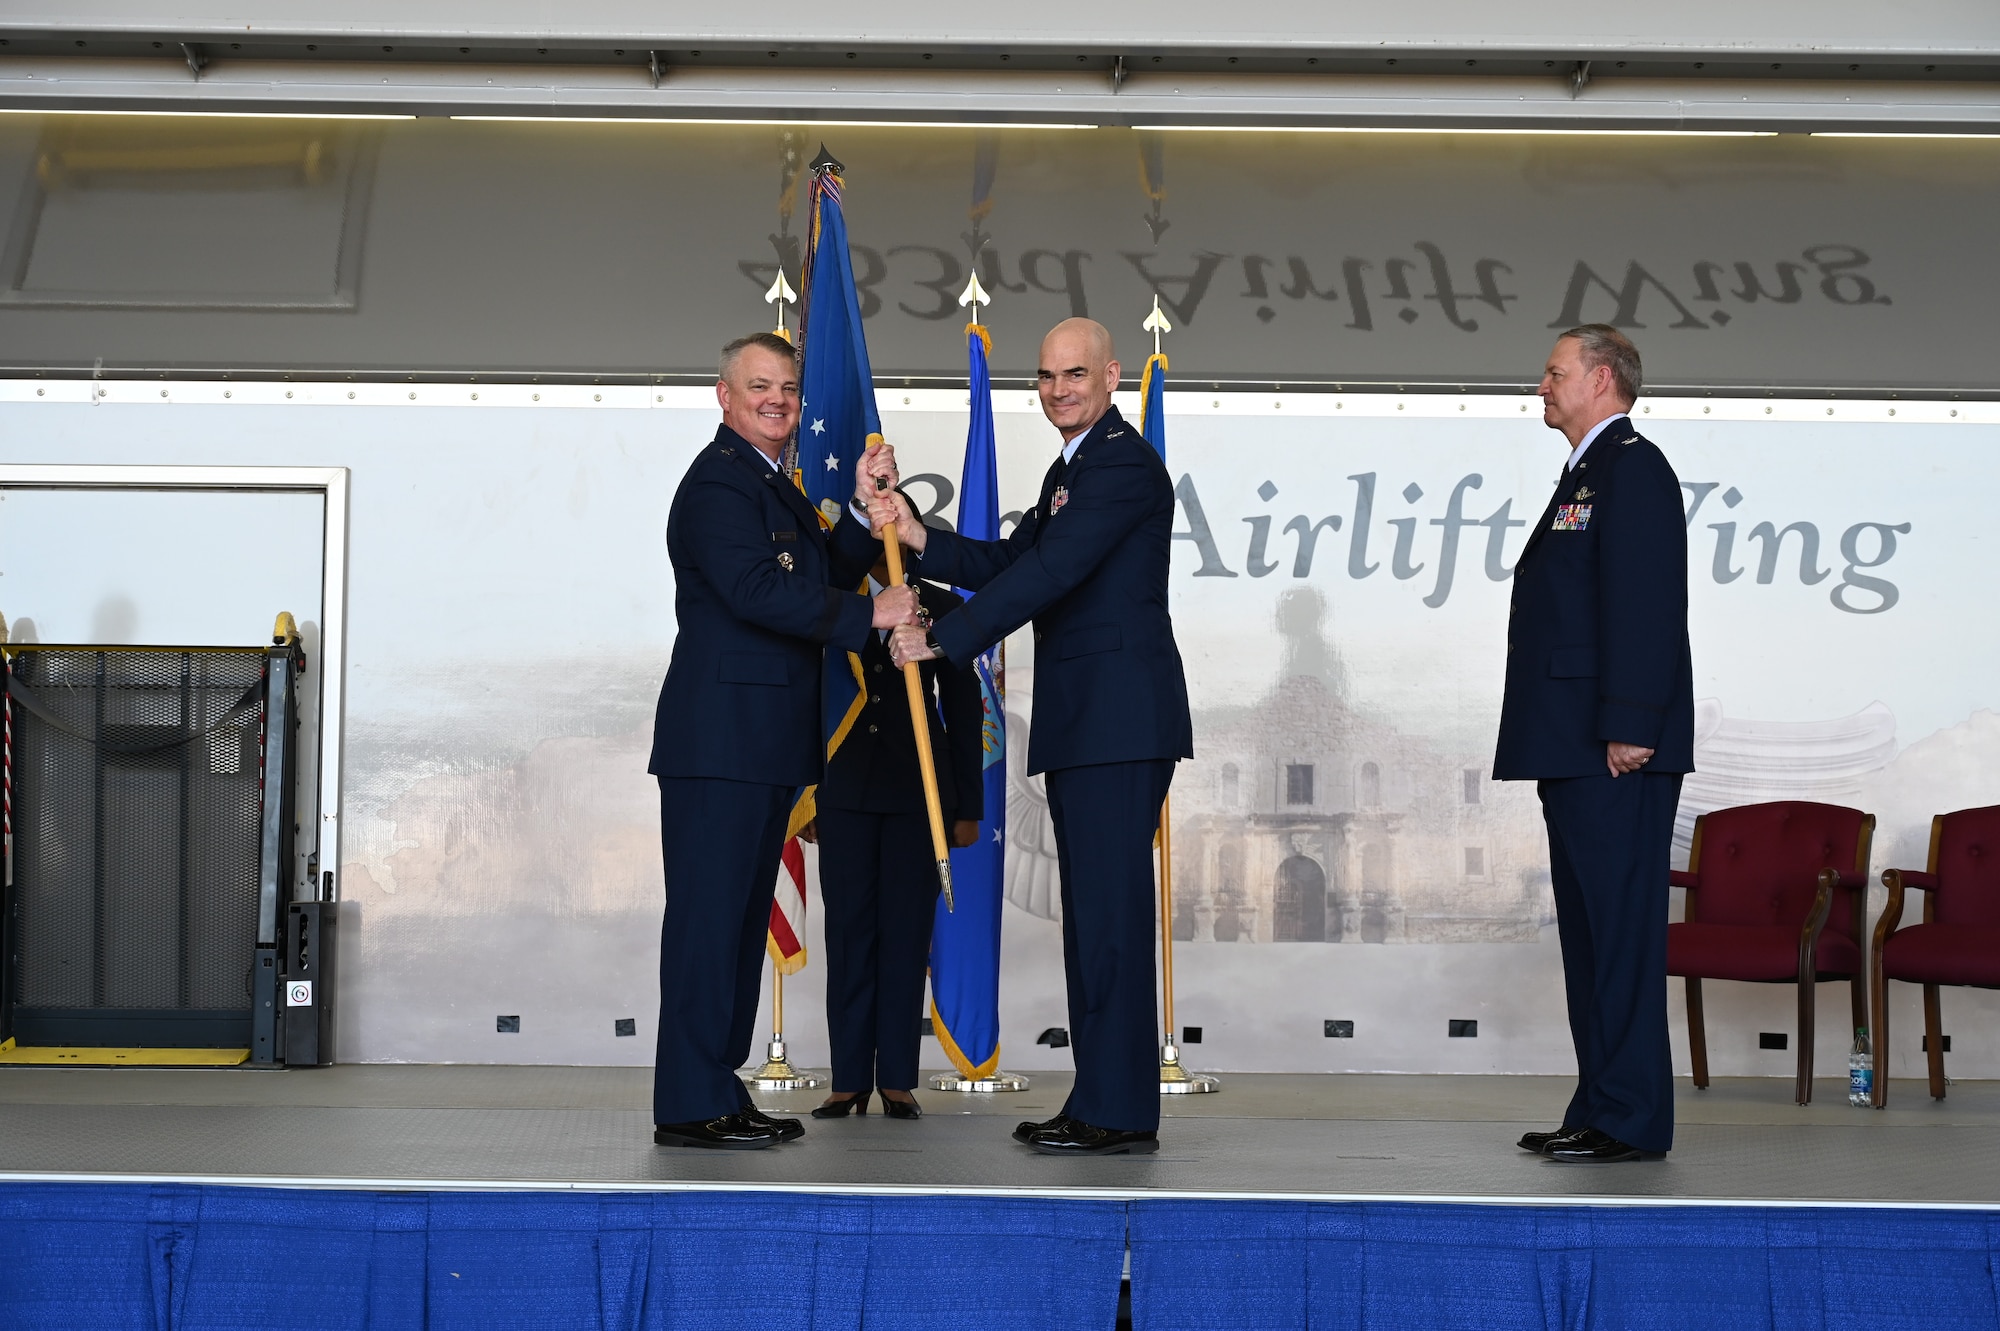 Brig. Gen. Derin Durham, 4th Air Force commander, offers the 433rd Airlift Wing guidon to Col. William Gutermuth, 433rd AW commander, during a change of command ceremony March, 5, 2023, at Joint Base San Antonio-Lackland, Texas. Gutermuth was formerly the commander of the 514th Air Mobility Wing located at Joint Base McGuire-Dix-Lakehurst, New Jersey. (U.S. Air Force photo by Master Sgt. Samantha Mathison)